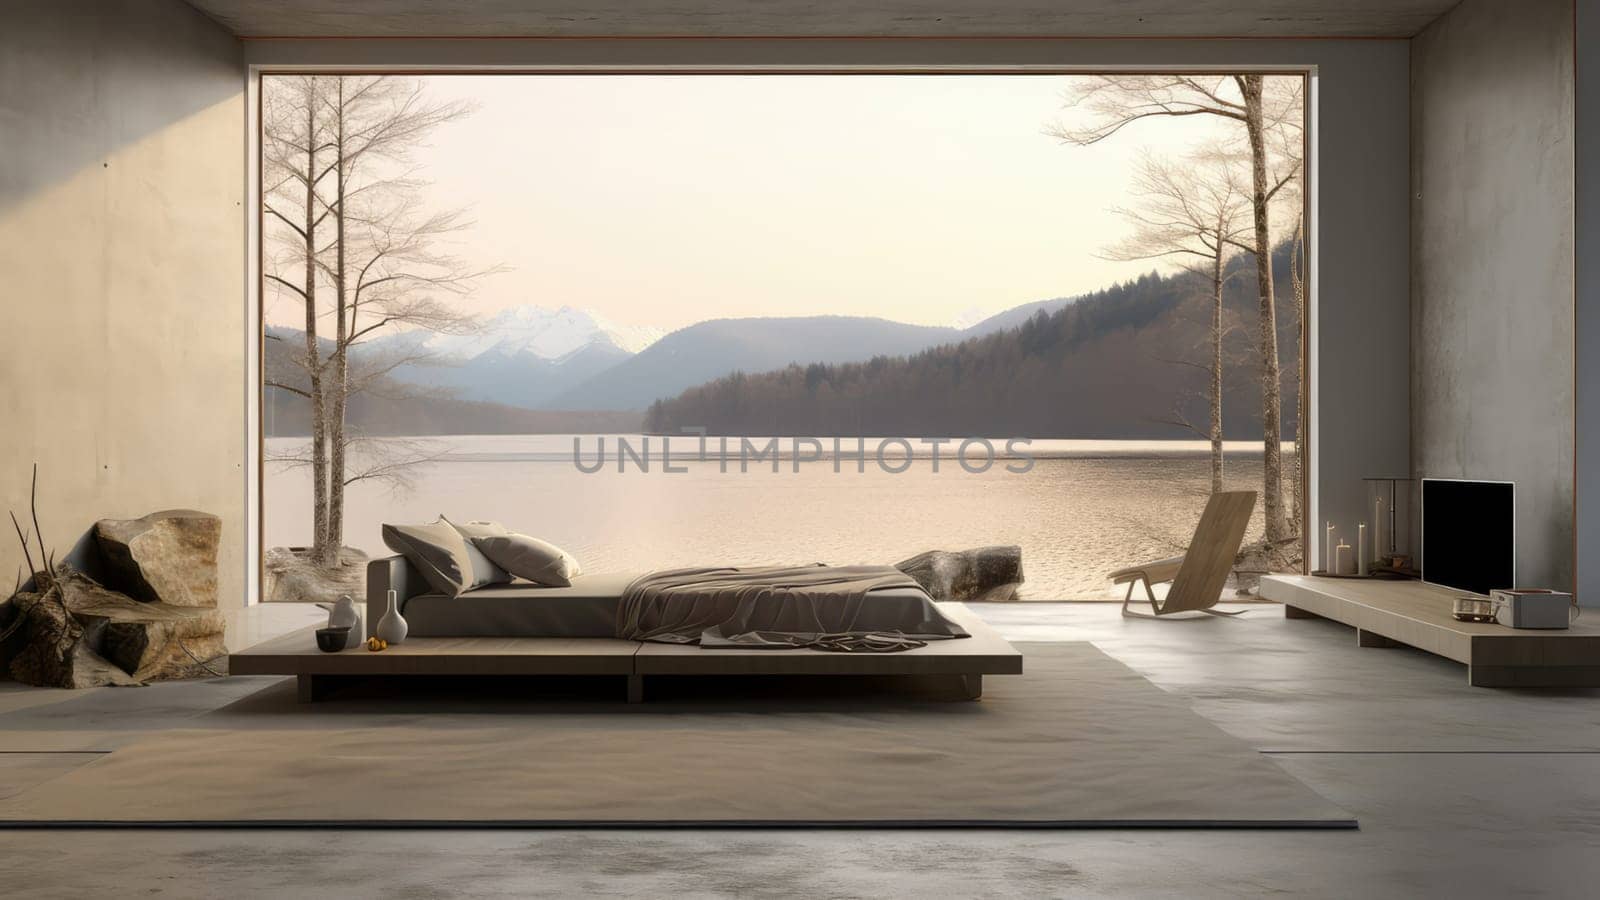 3D rendering of a bedroom with a large window overlooking a natural view. The room is decorated in a cozy and hospitality style.